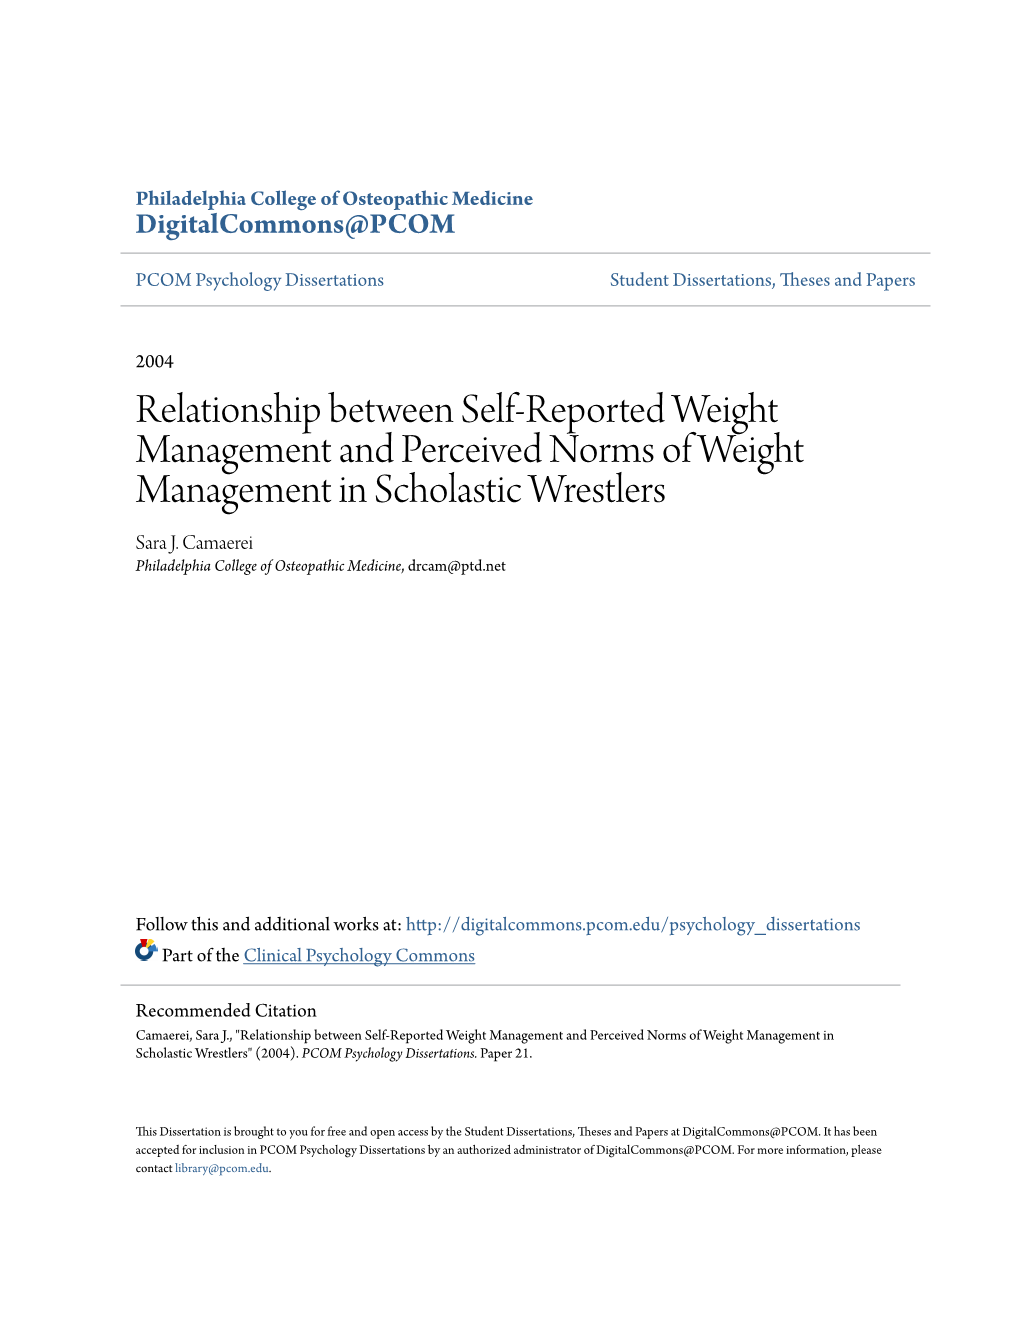 Relationship Between Self-Reported Weight Management and Perceived Norms of Weight Management in Scholastic Wrestlers Sara J